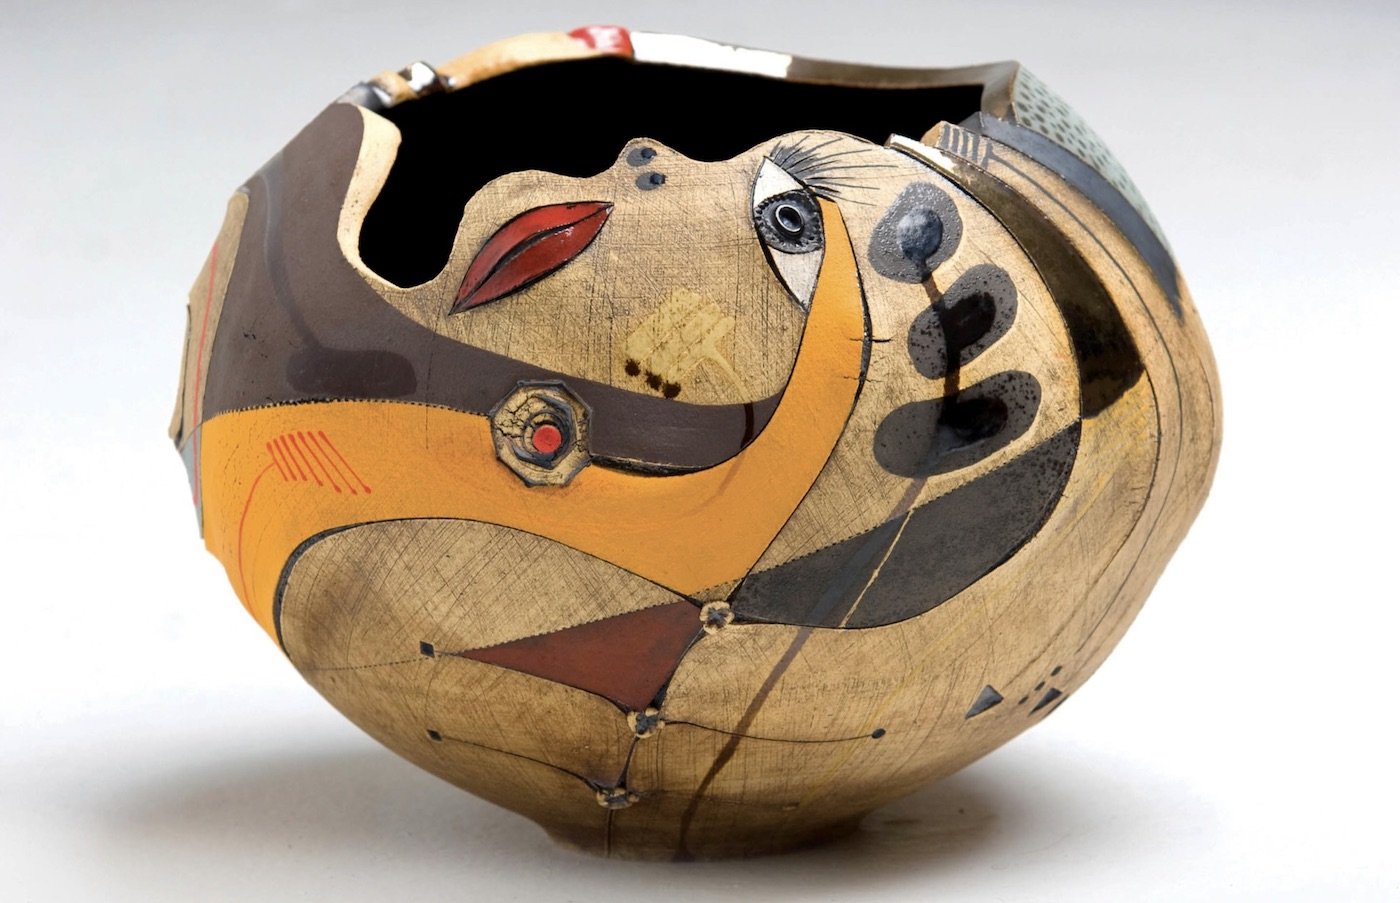 Bowl shaped vase, with strong inspirations to the artist Picasso while infused with a celebration of Africa